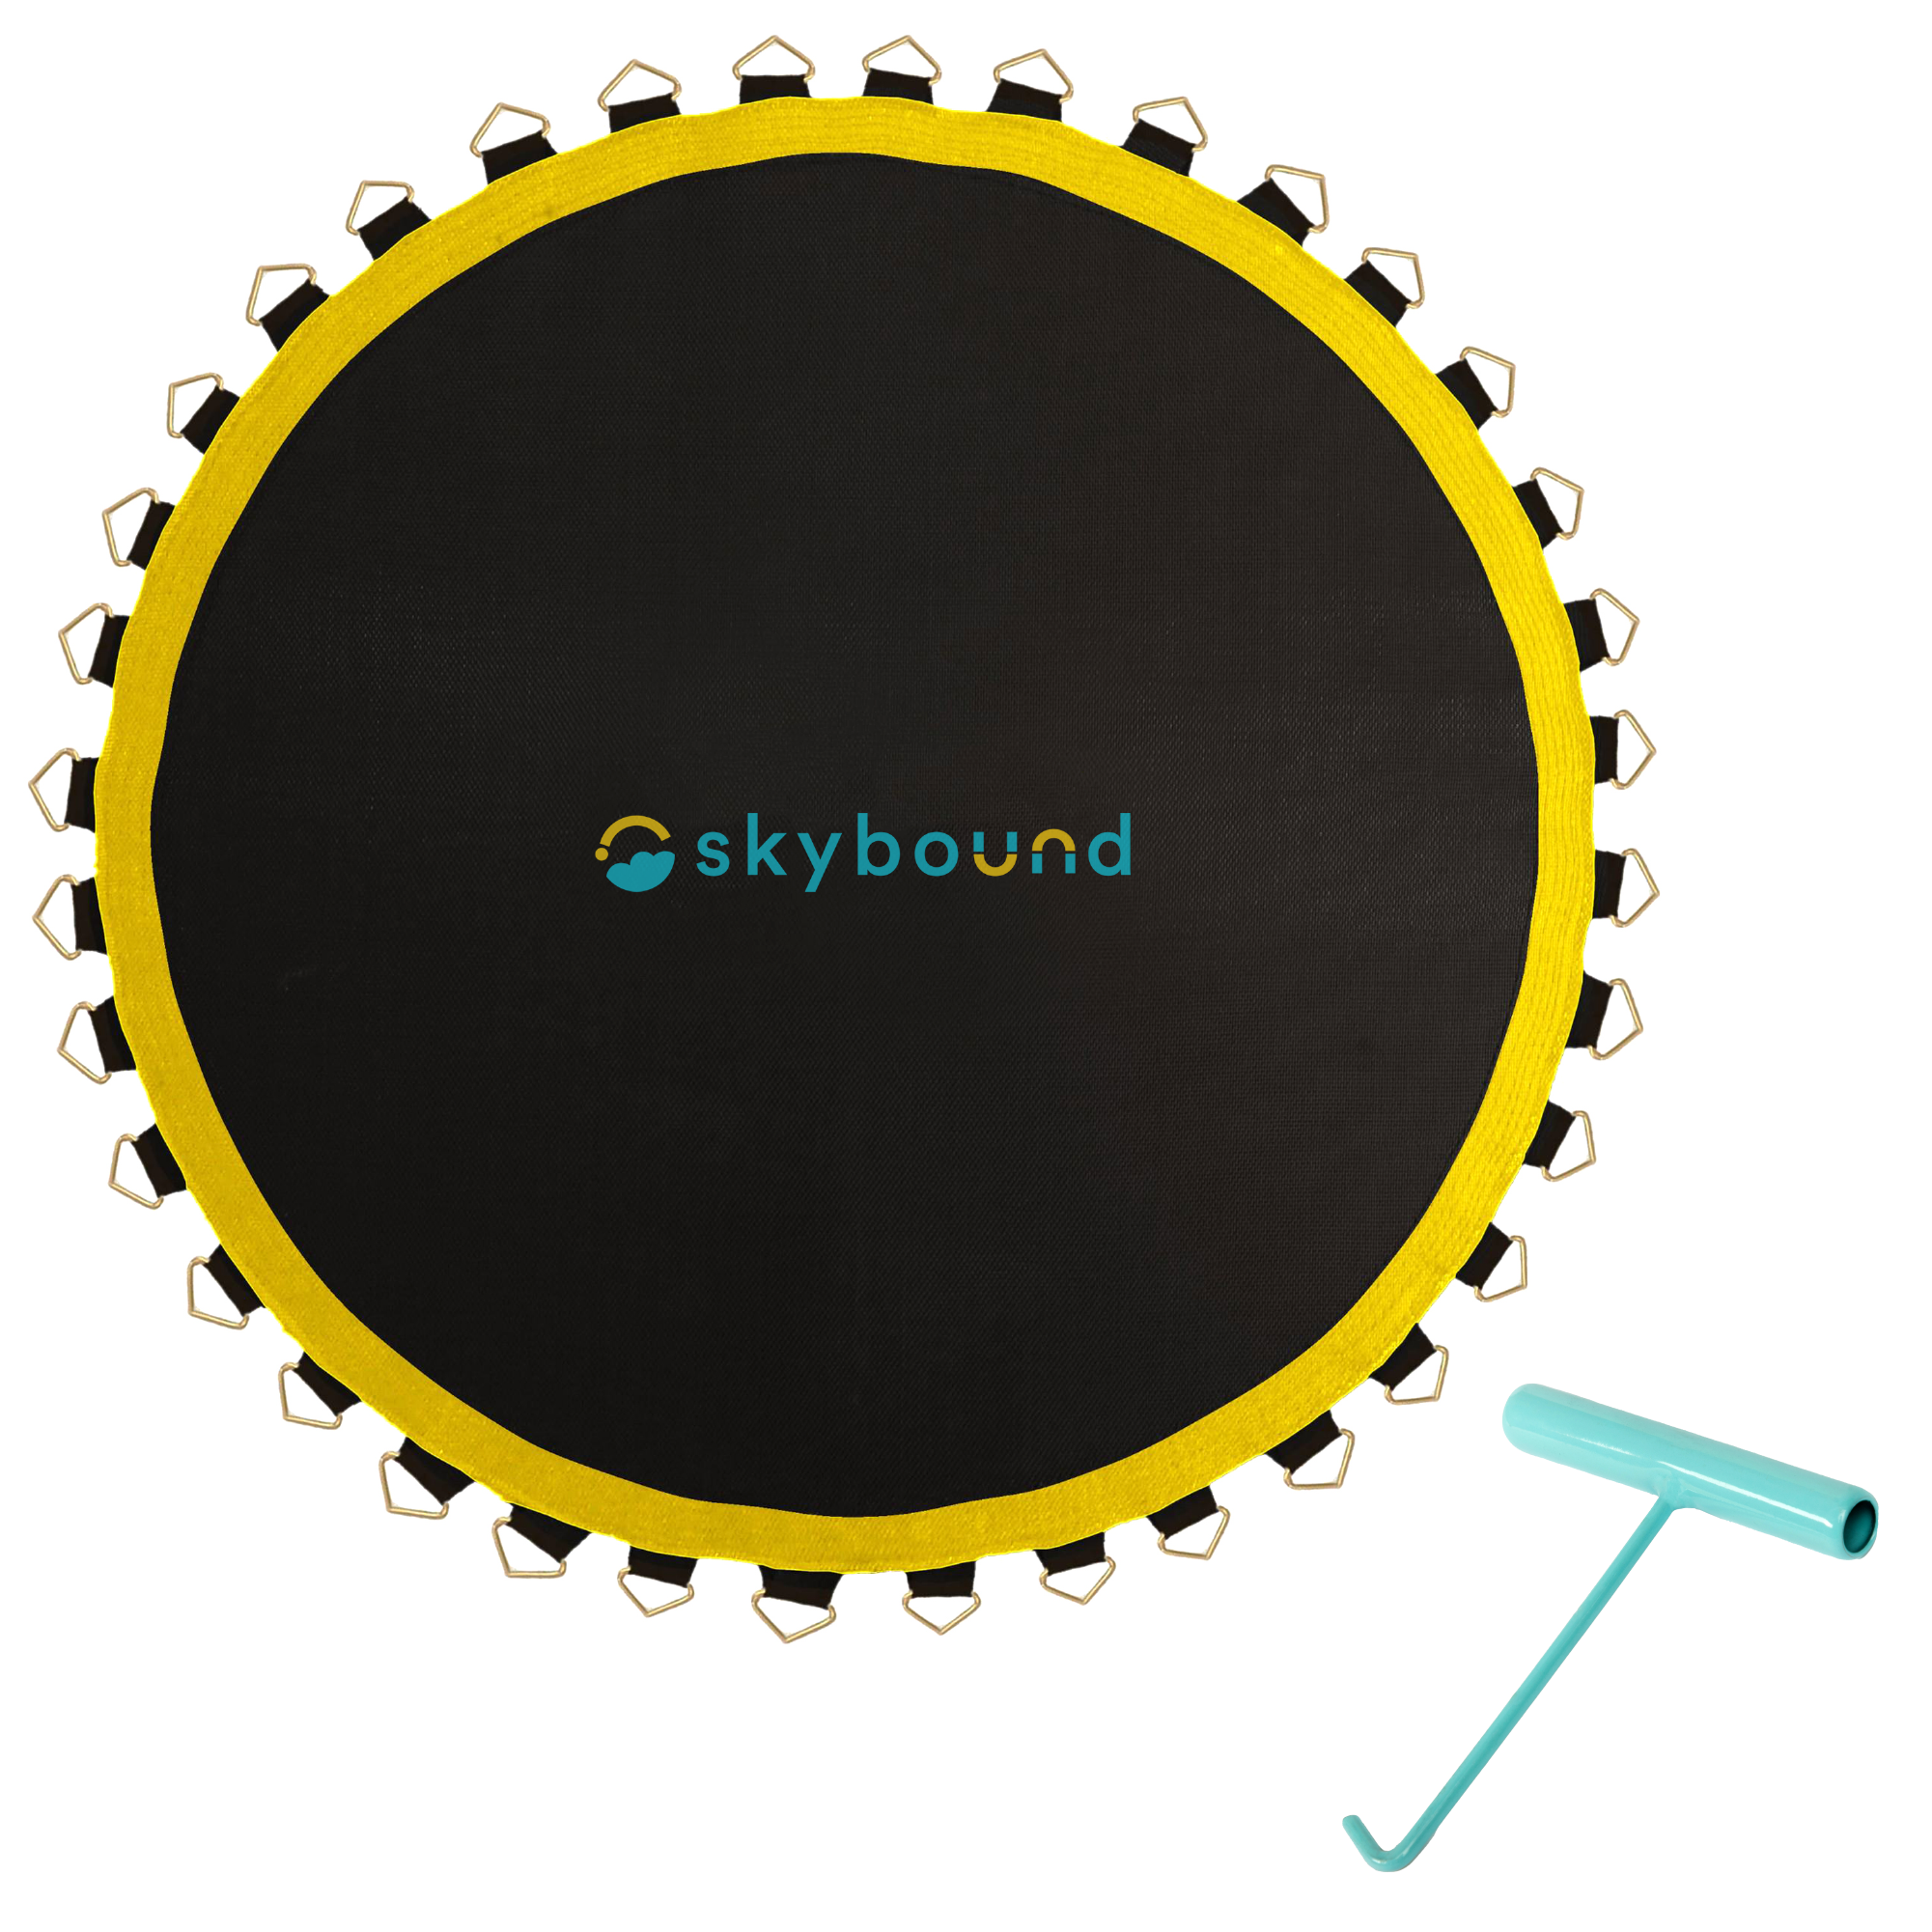 Premium Replacement Mat for 14ft Trampolines - 144in / 96 V-Rings / 8.5in Springs - SkyBound USA